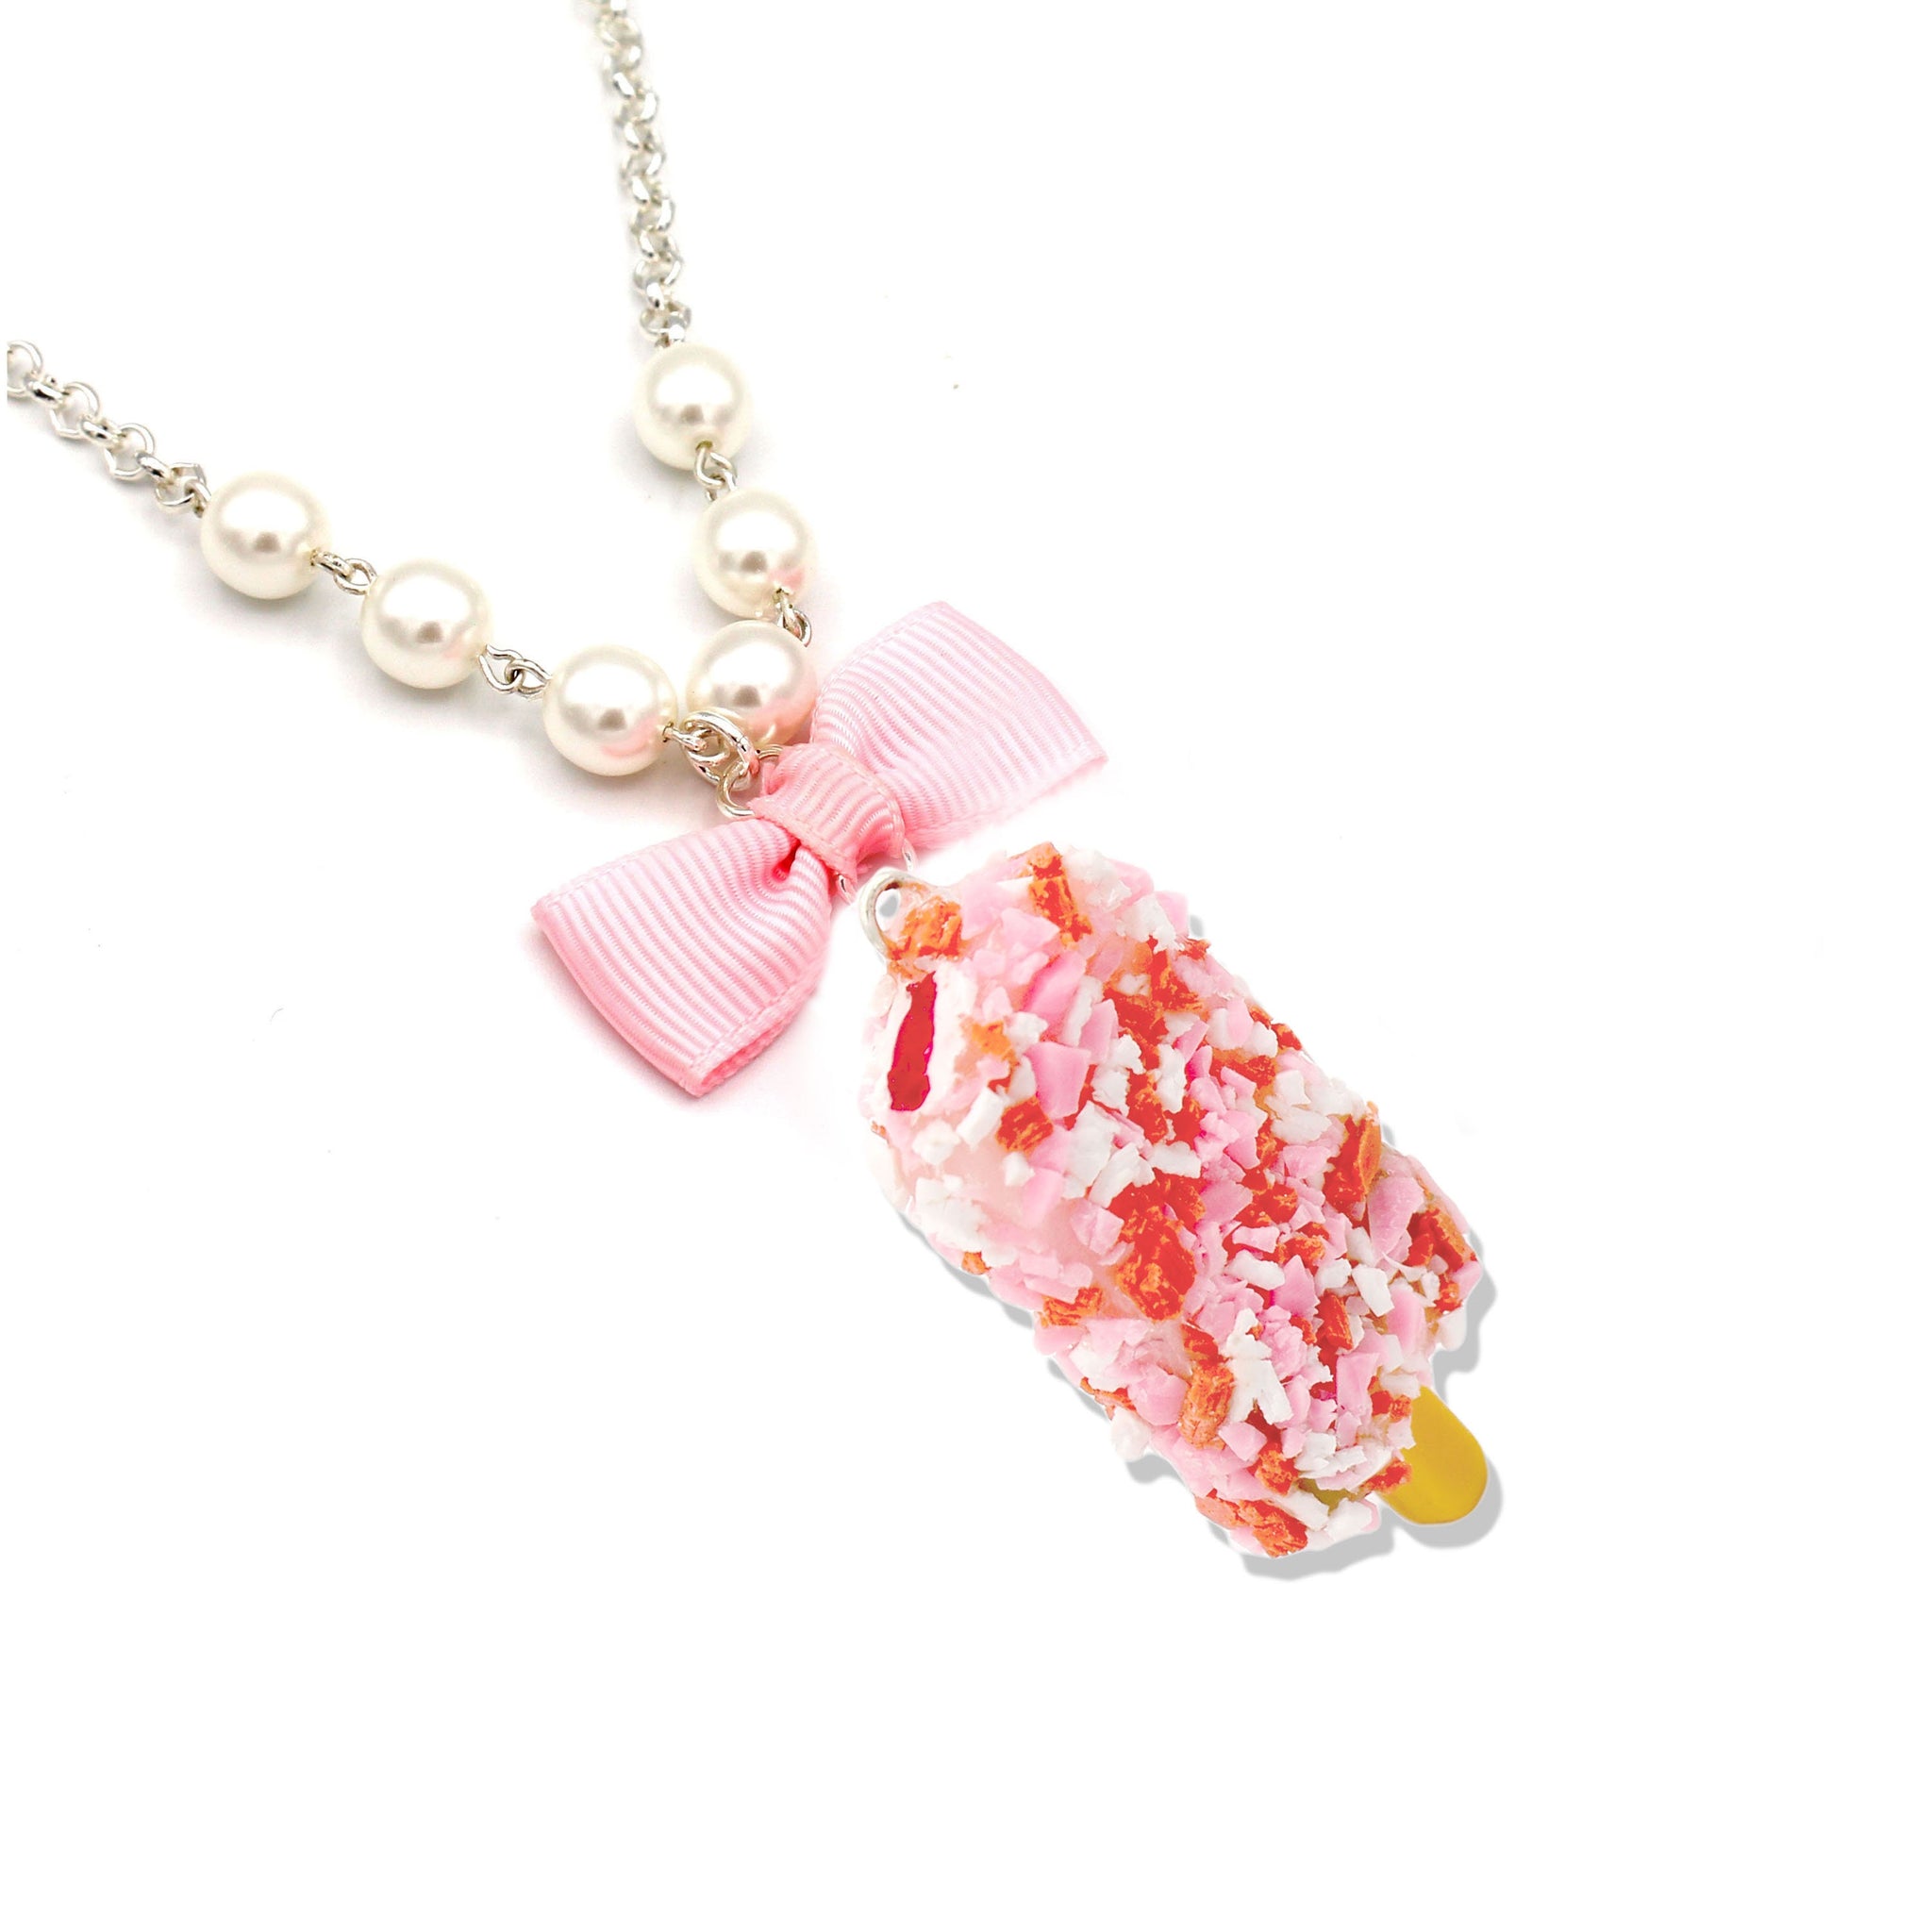 Strawberry Shortcake Necklace by LaliBlue – Quirks!